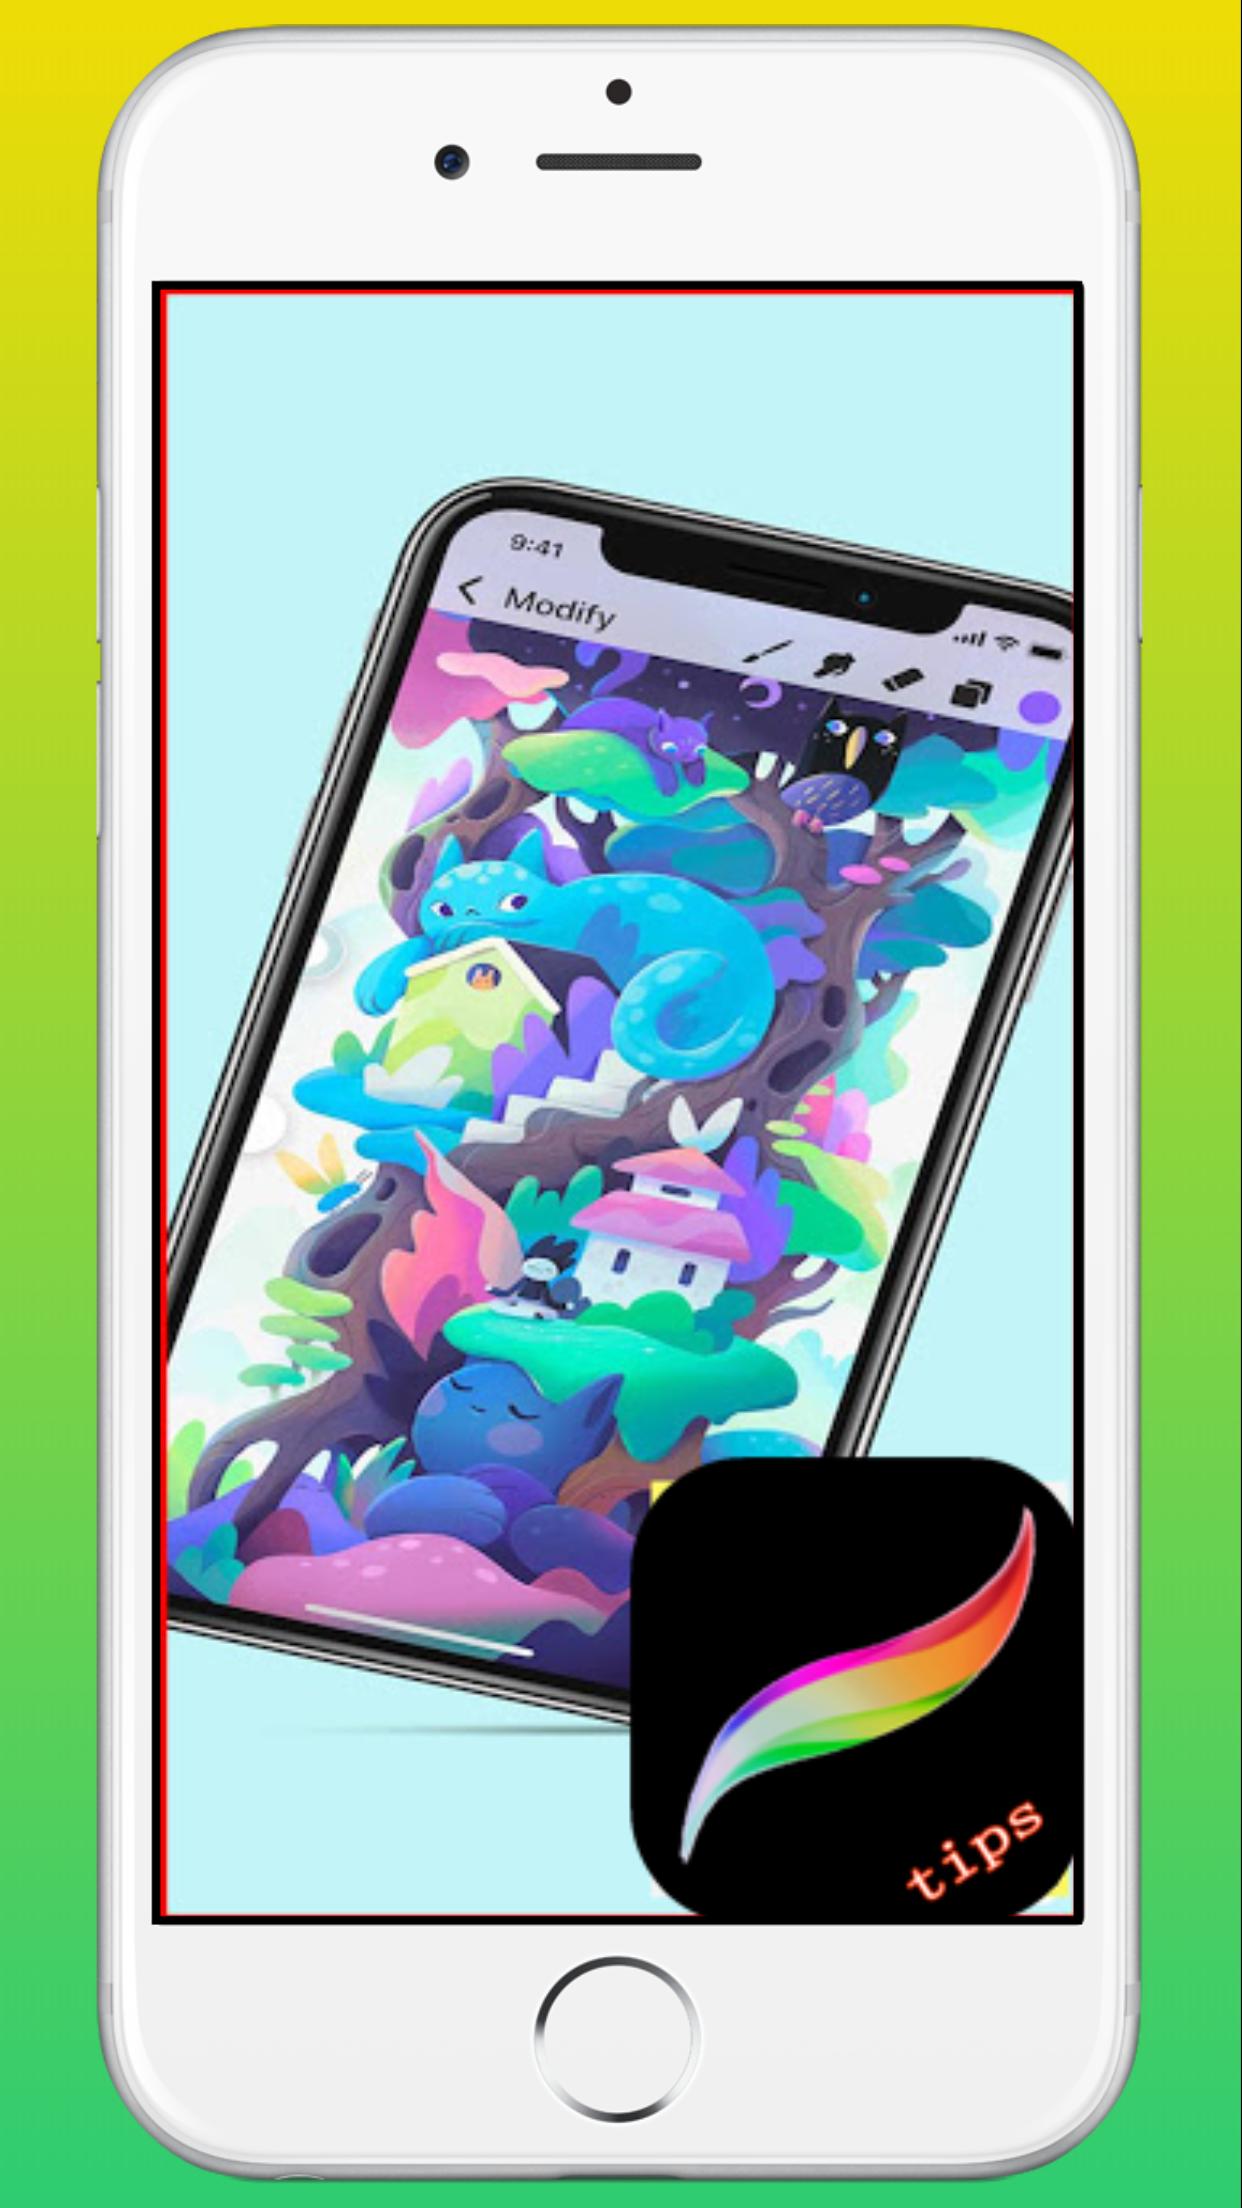 55 Best Pictures Procreate App Android : Procreate Android Mod APK v4.3